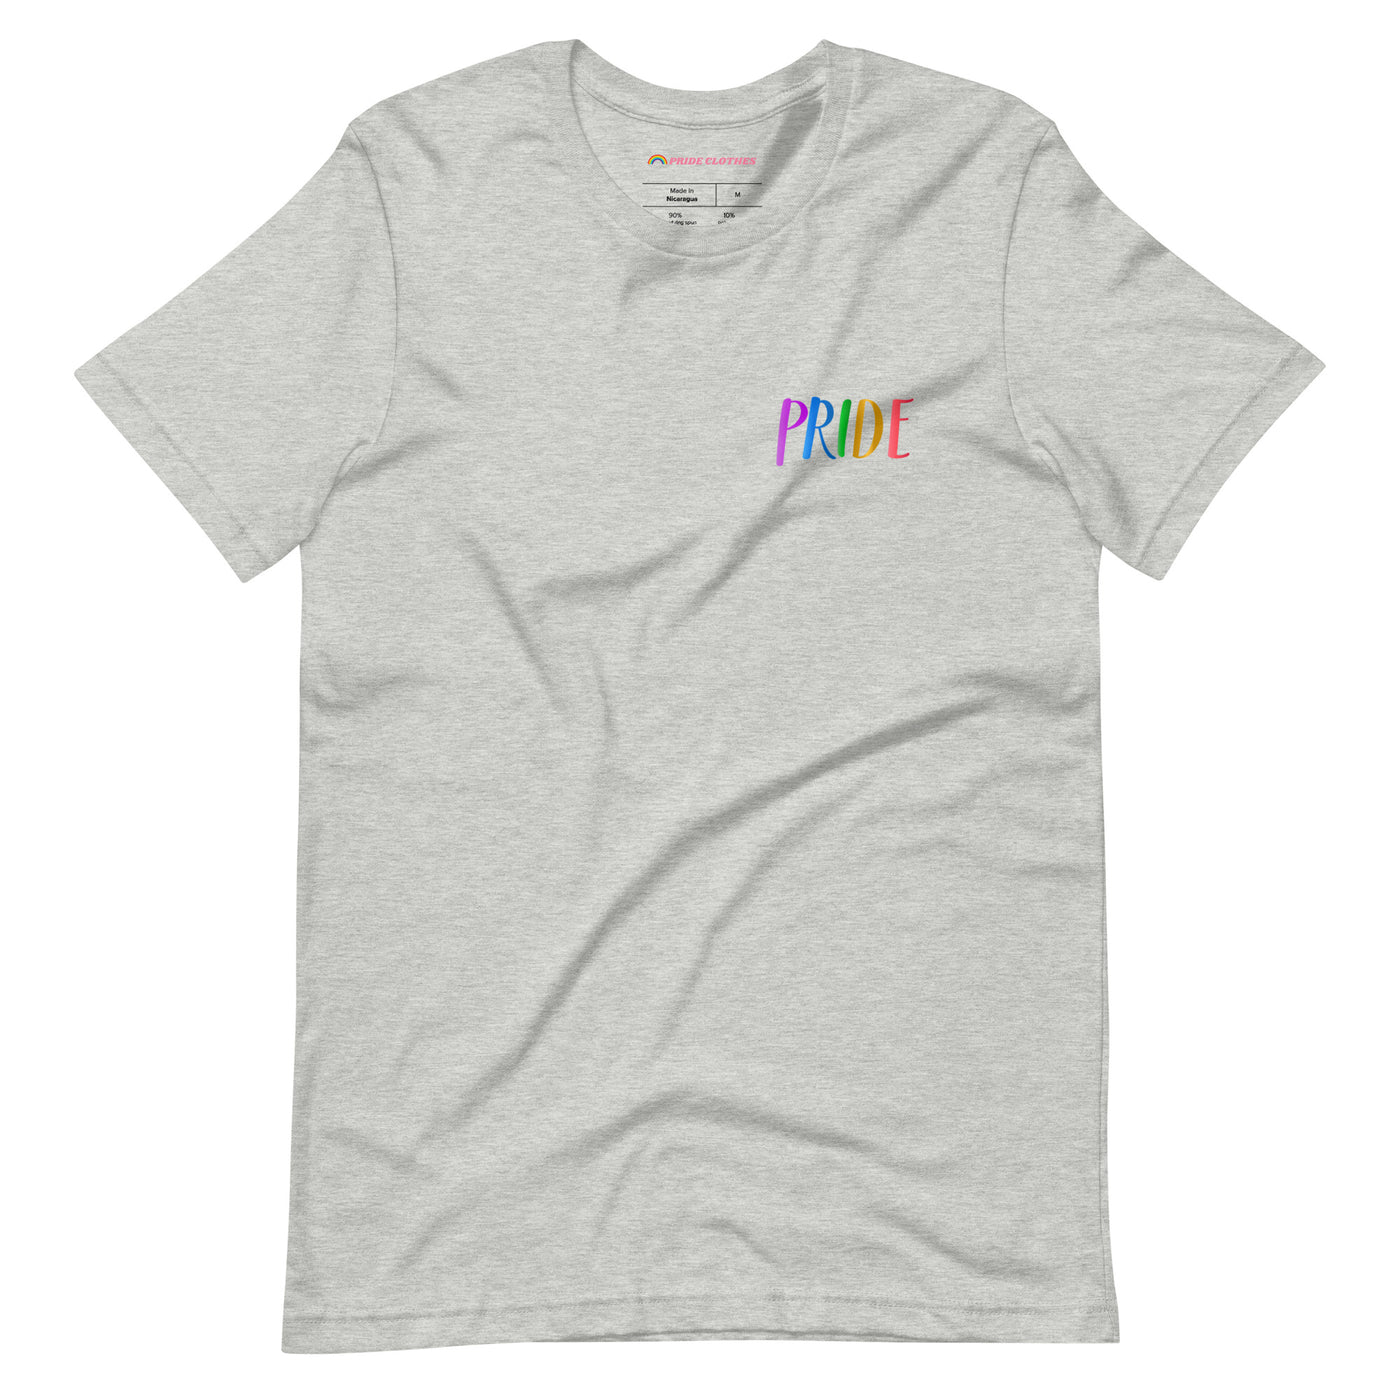 Pride Clothes - A Simple and Proud Gay Shirt for You - Athletic Heather